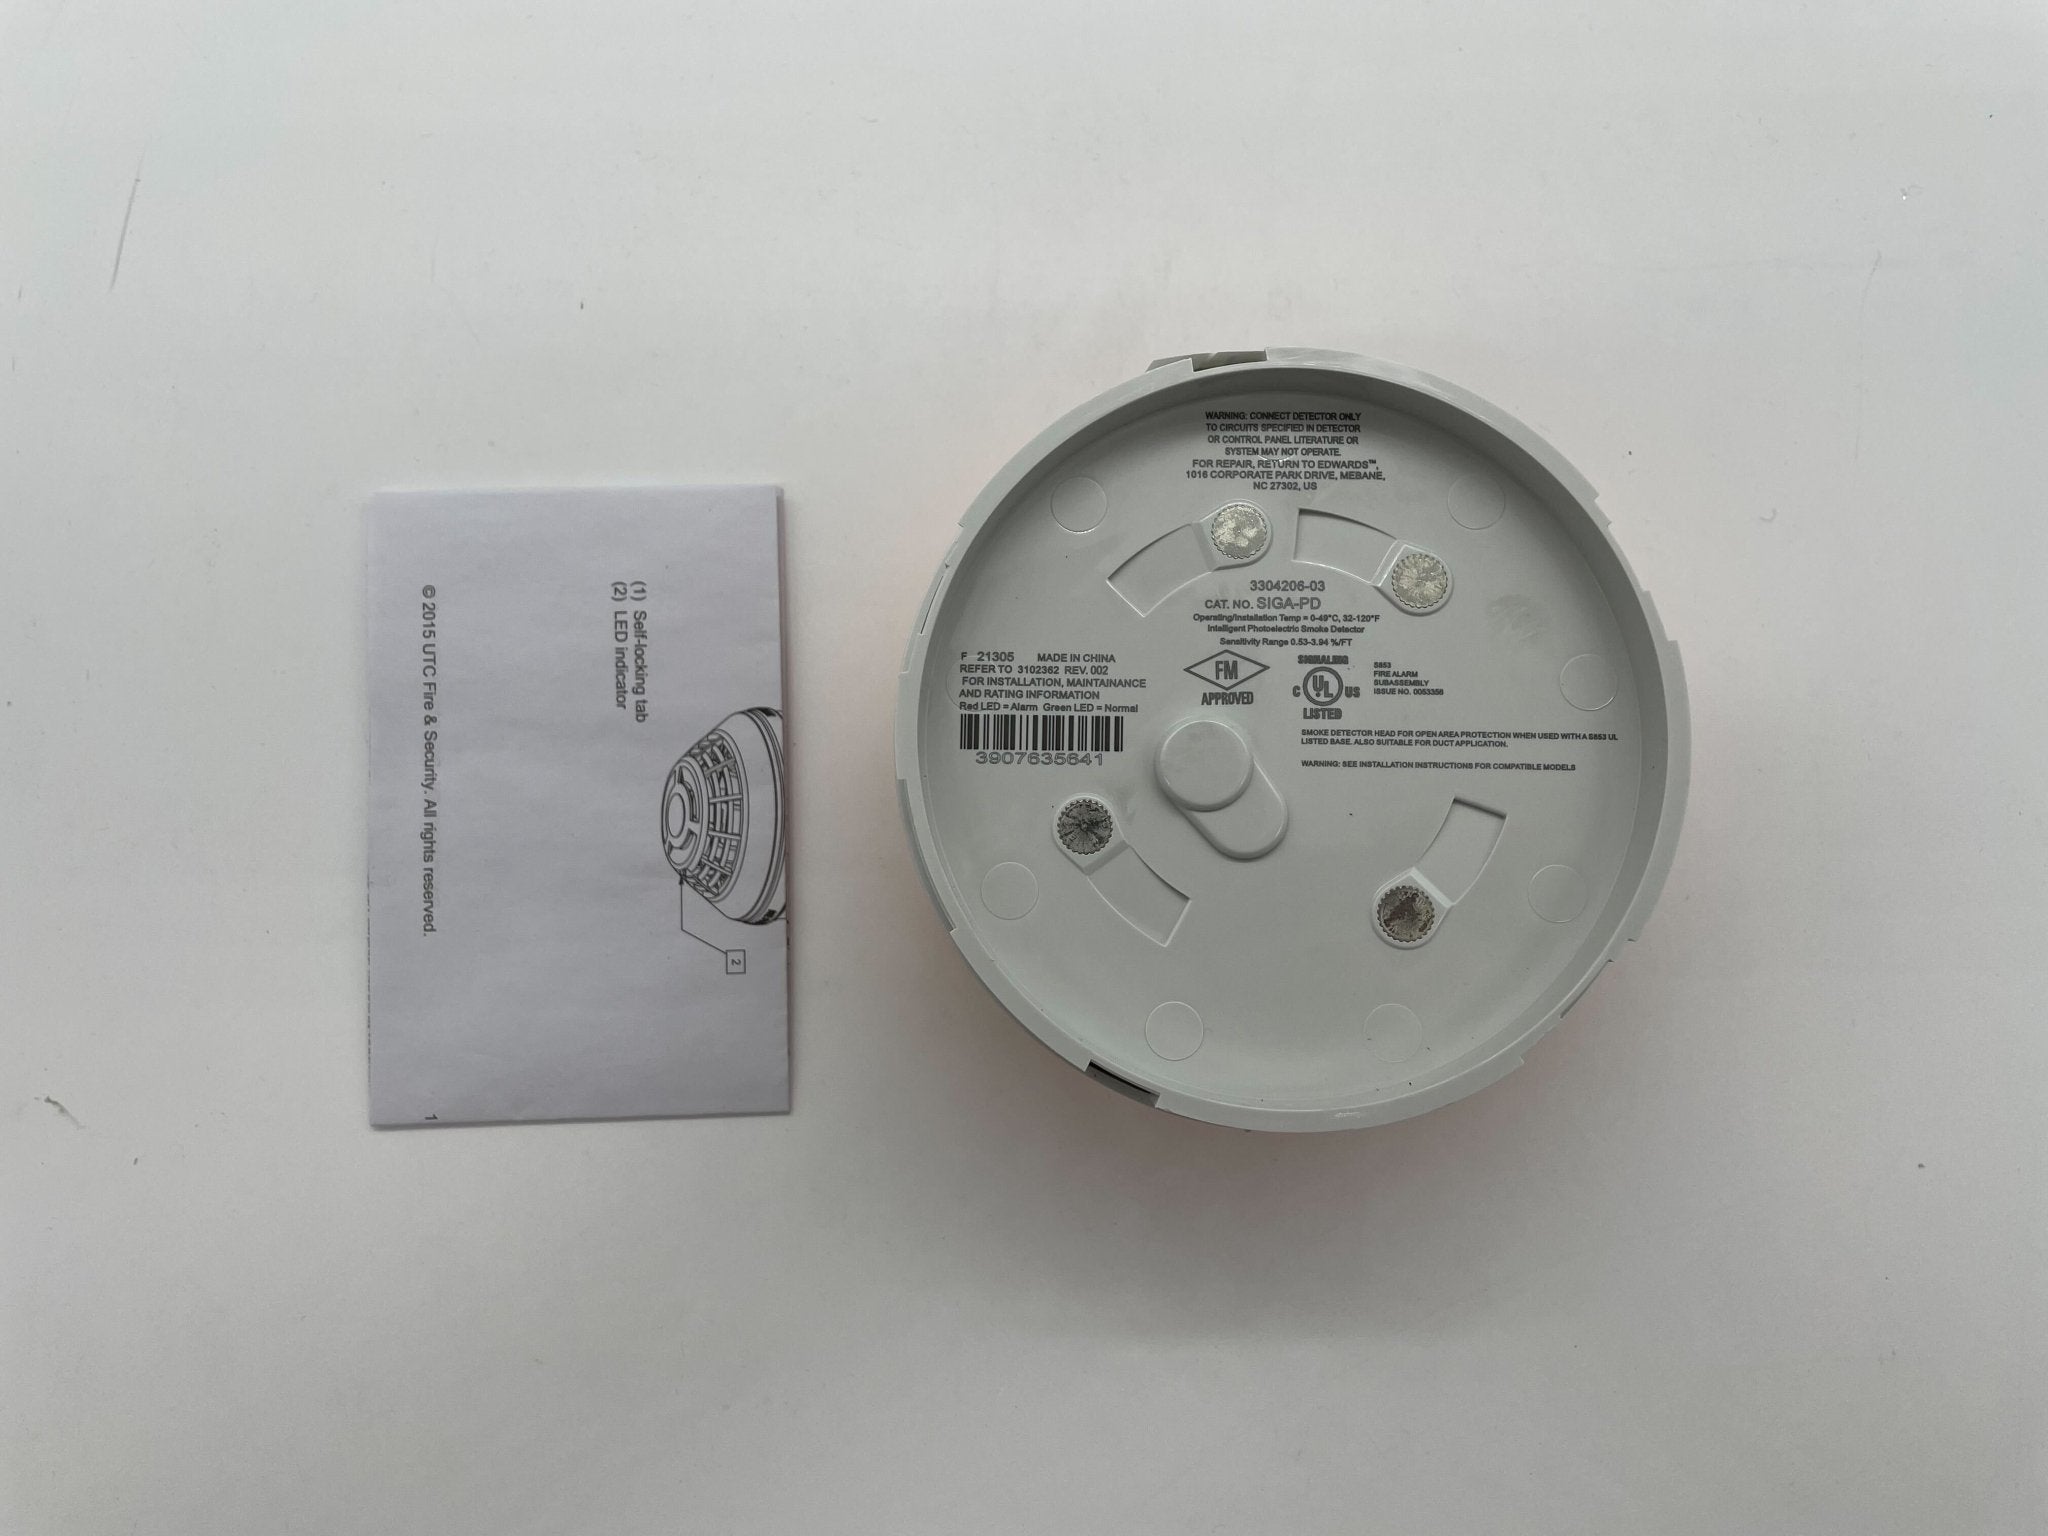 Edwards SIGA-PD (Discontinued, Use the Direct Replacement SIGA-OSD) - The Fire Alarm Supplier